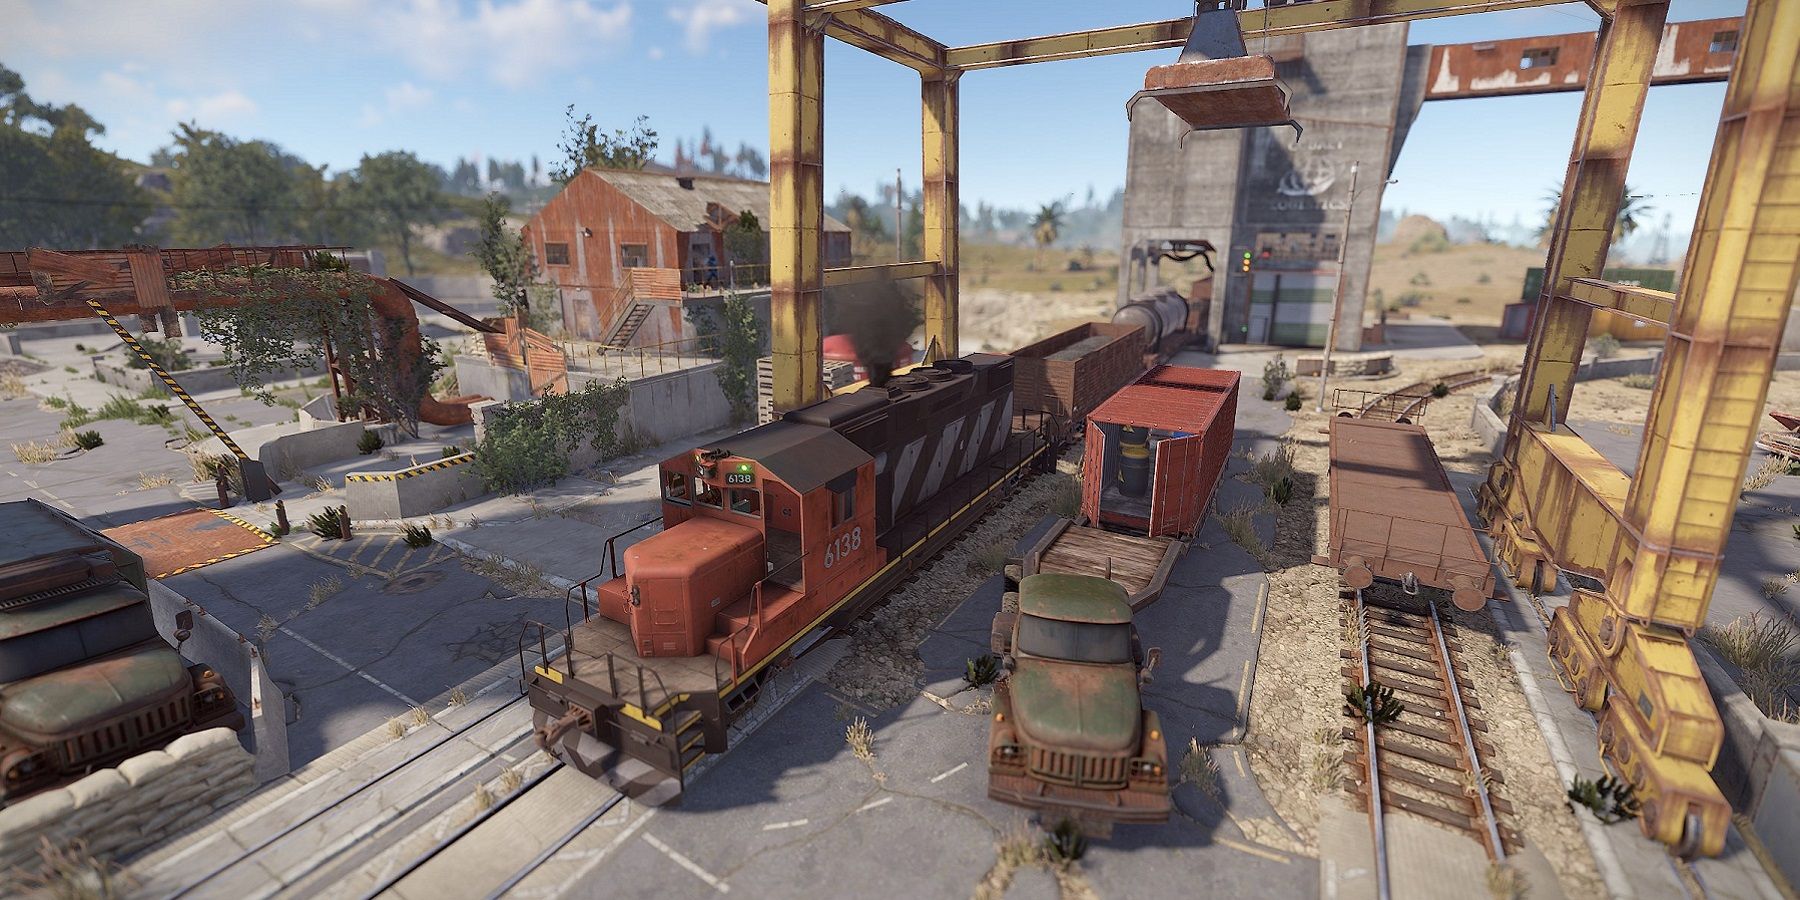 An image from Rust showing a couple of old trains on the above-ground railway system.